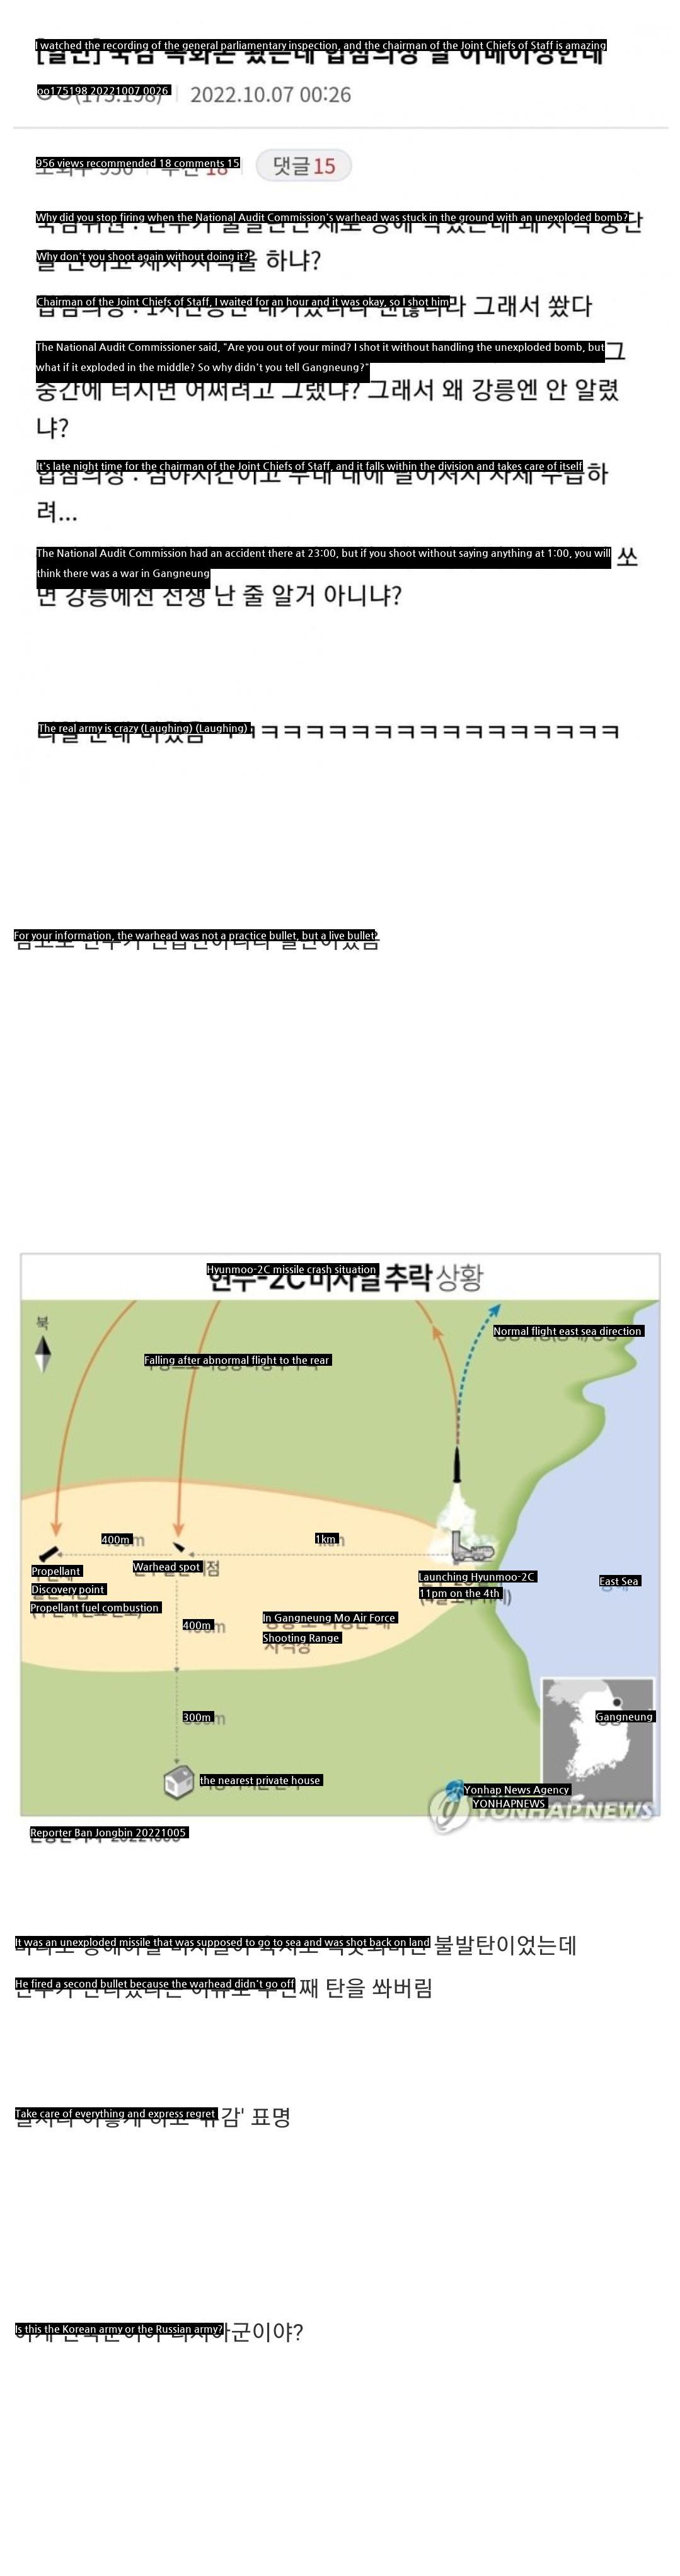 How the Korean Army is doing, Gangneung Missile Incidents